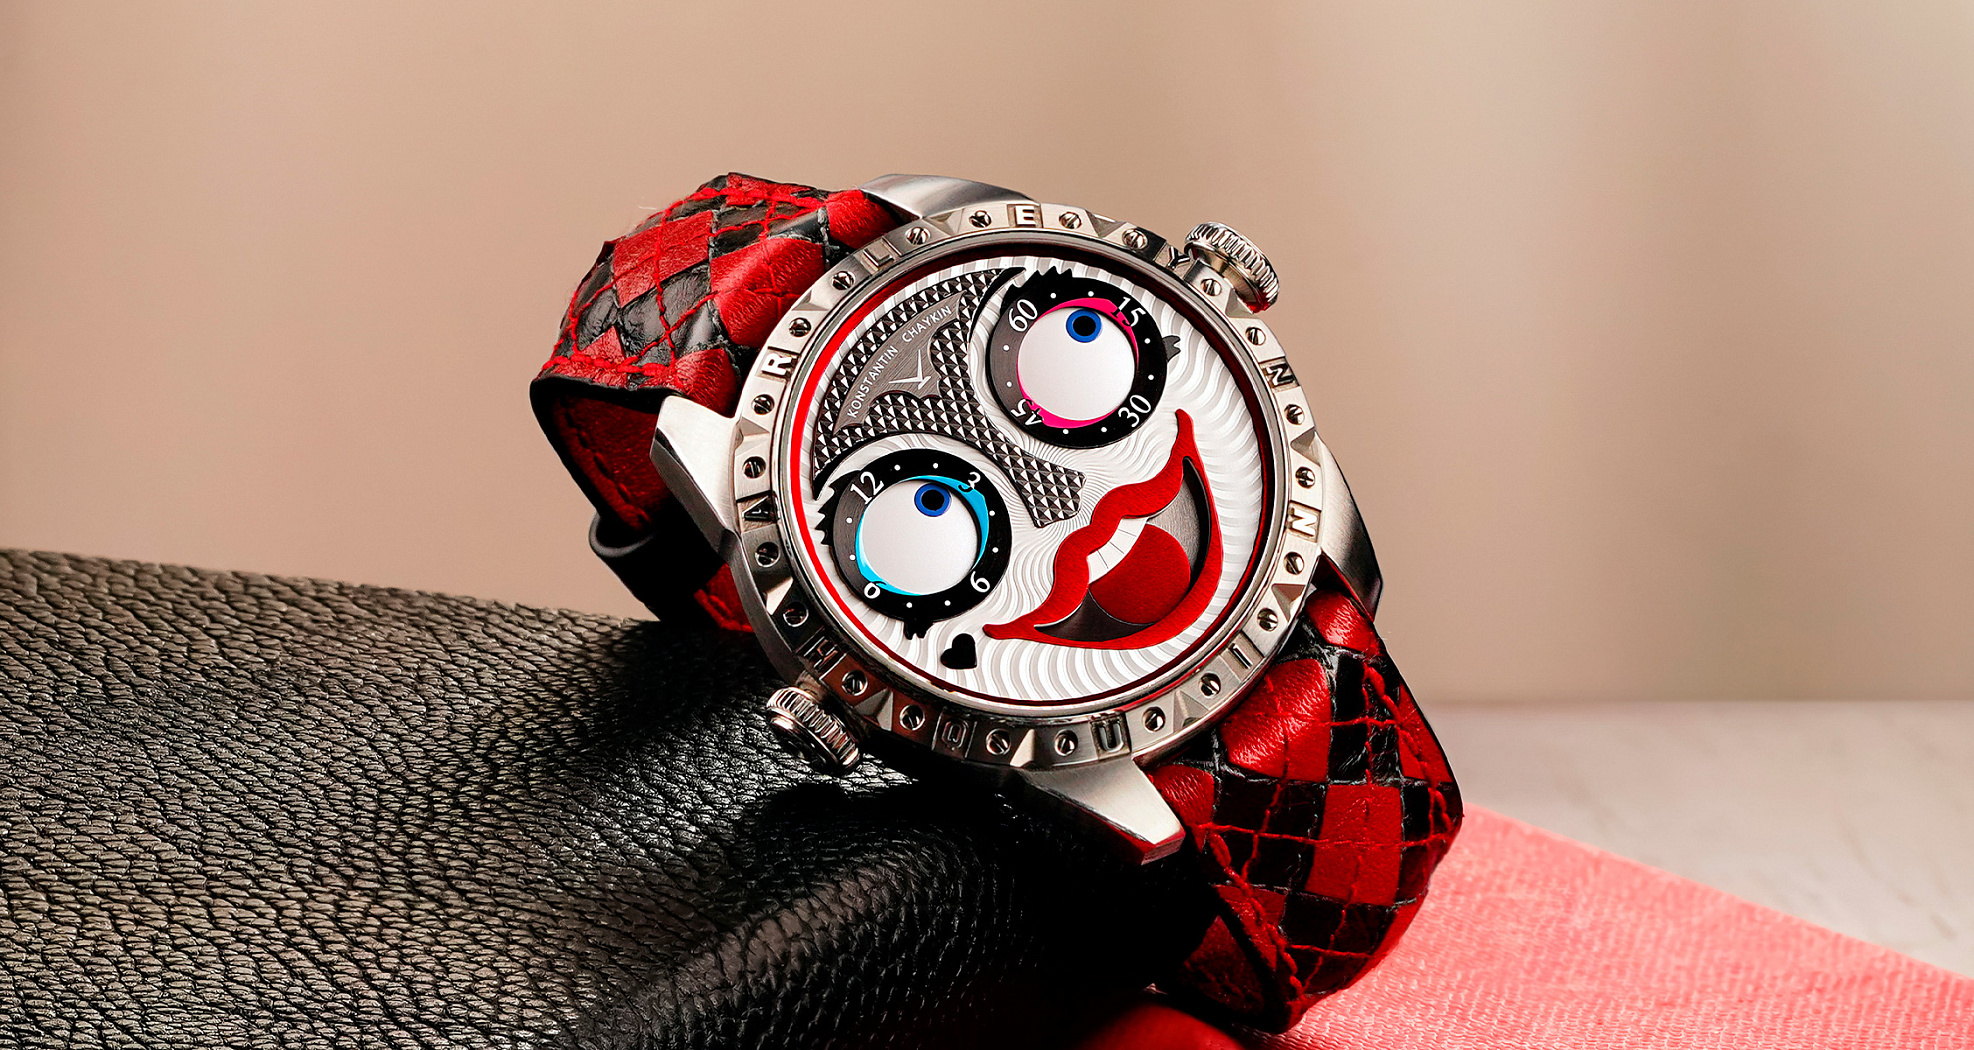 The Harley Queen watch&lt;br&gt; is one of the nominees&lt;br&gt; for the GPHG 2022 Awards